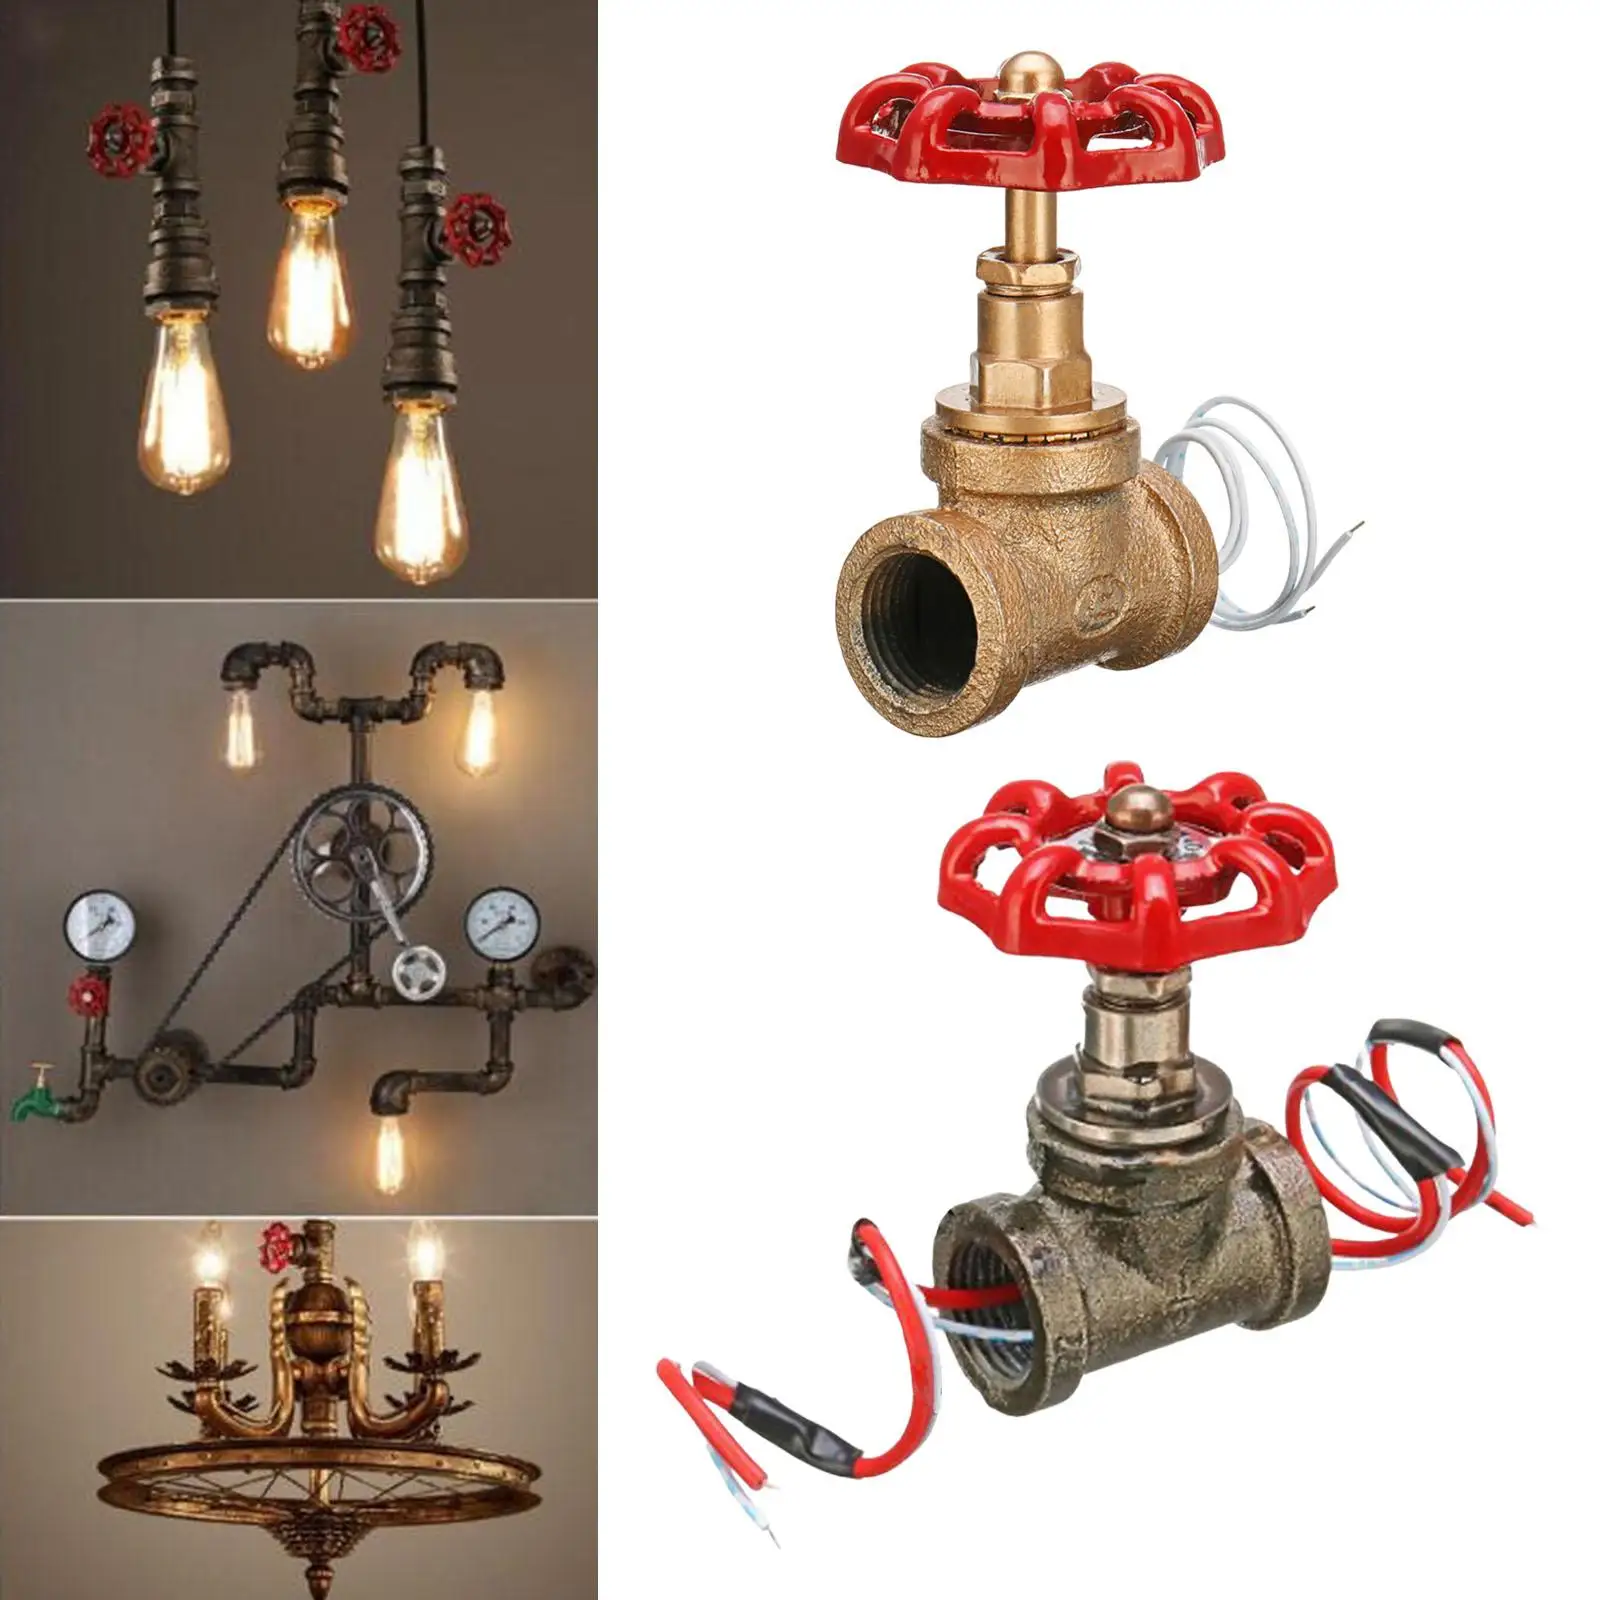 Vintage Industrial Light Switch Parts with Wire Fixtures Stop Valve Easy Install for Home Bar Club